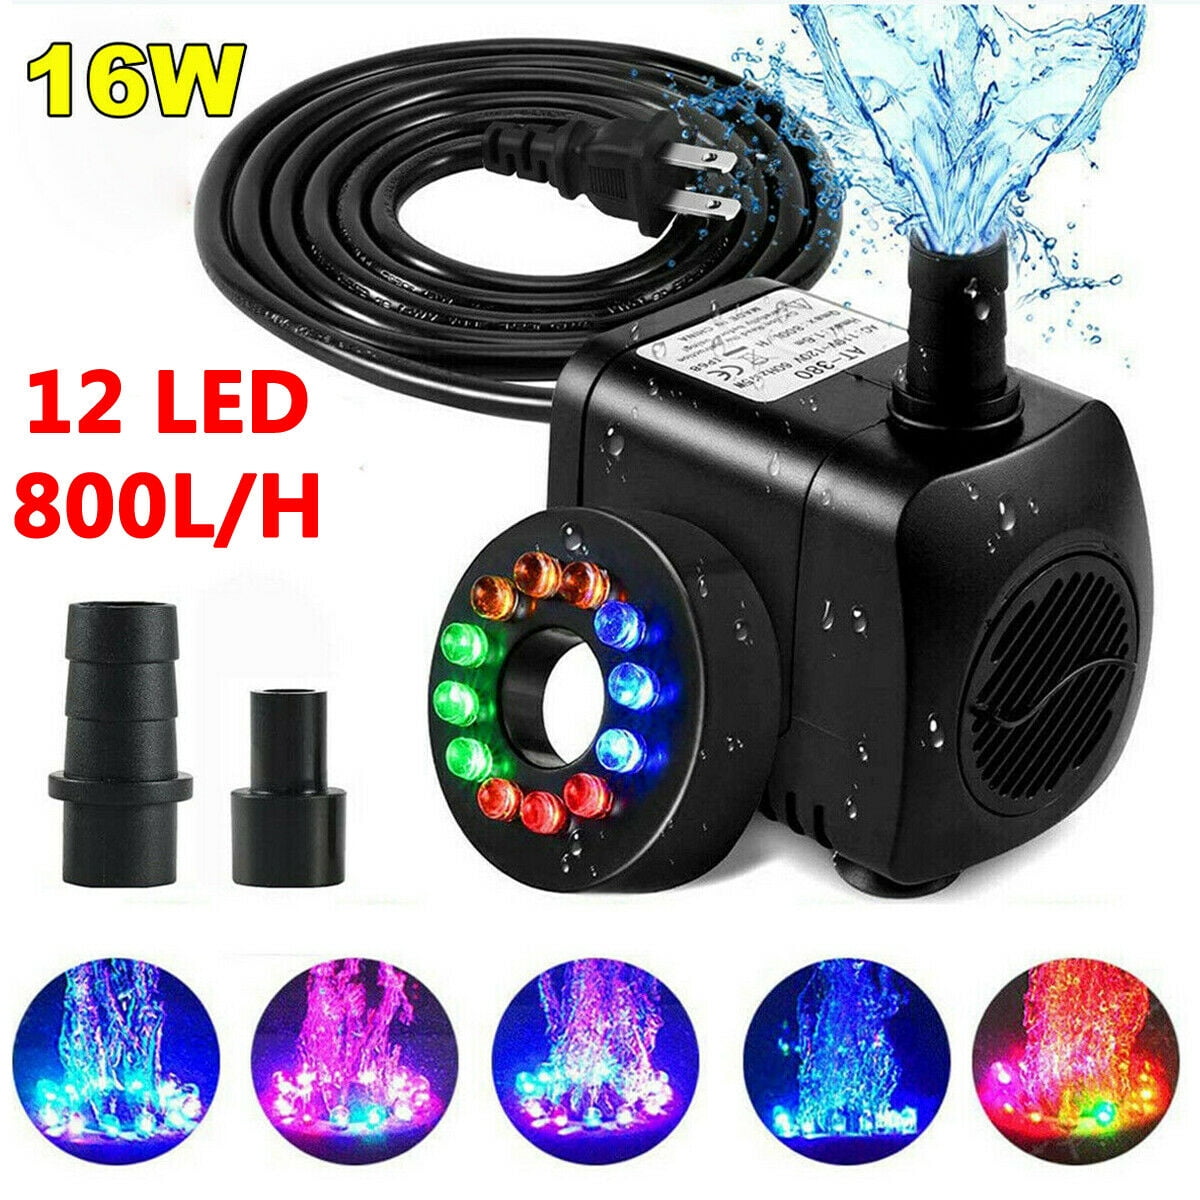 Submersible Water Pump With 12 LED Light For Fountain Pool Garden Pond   **1~ 